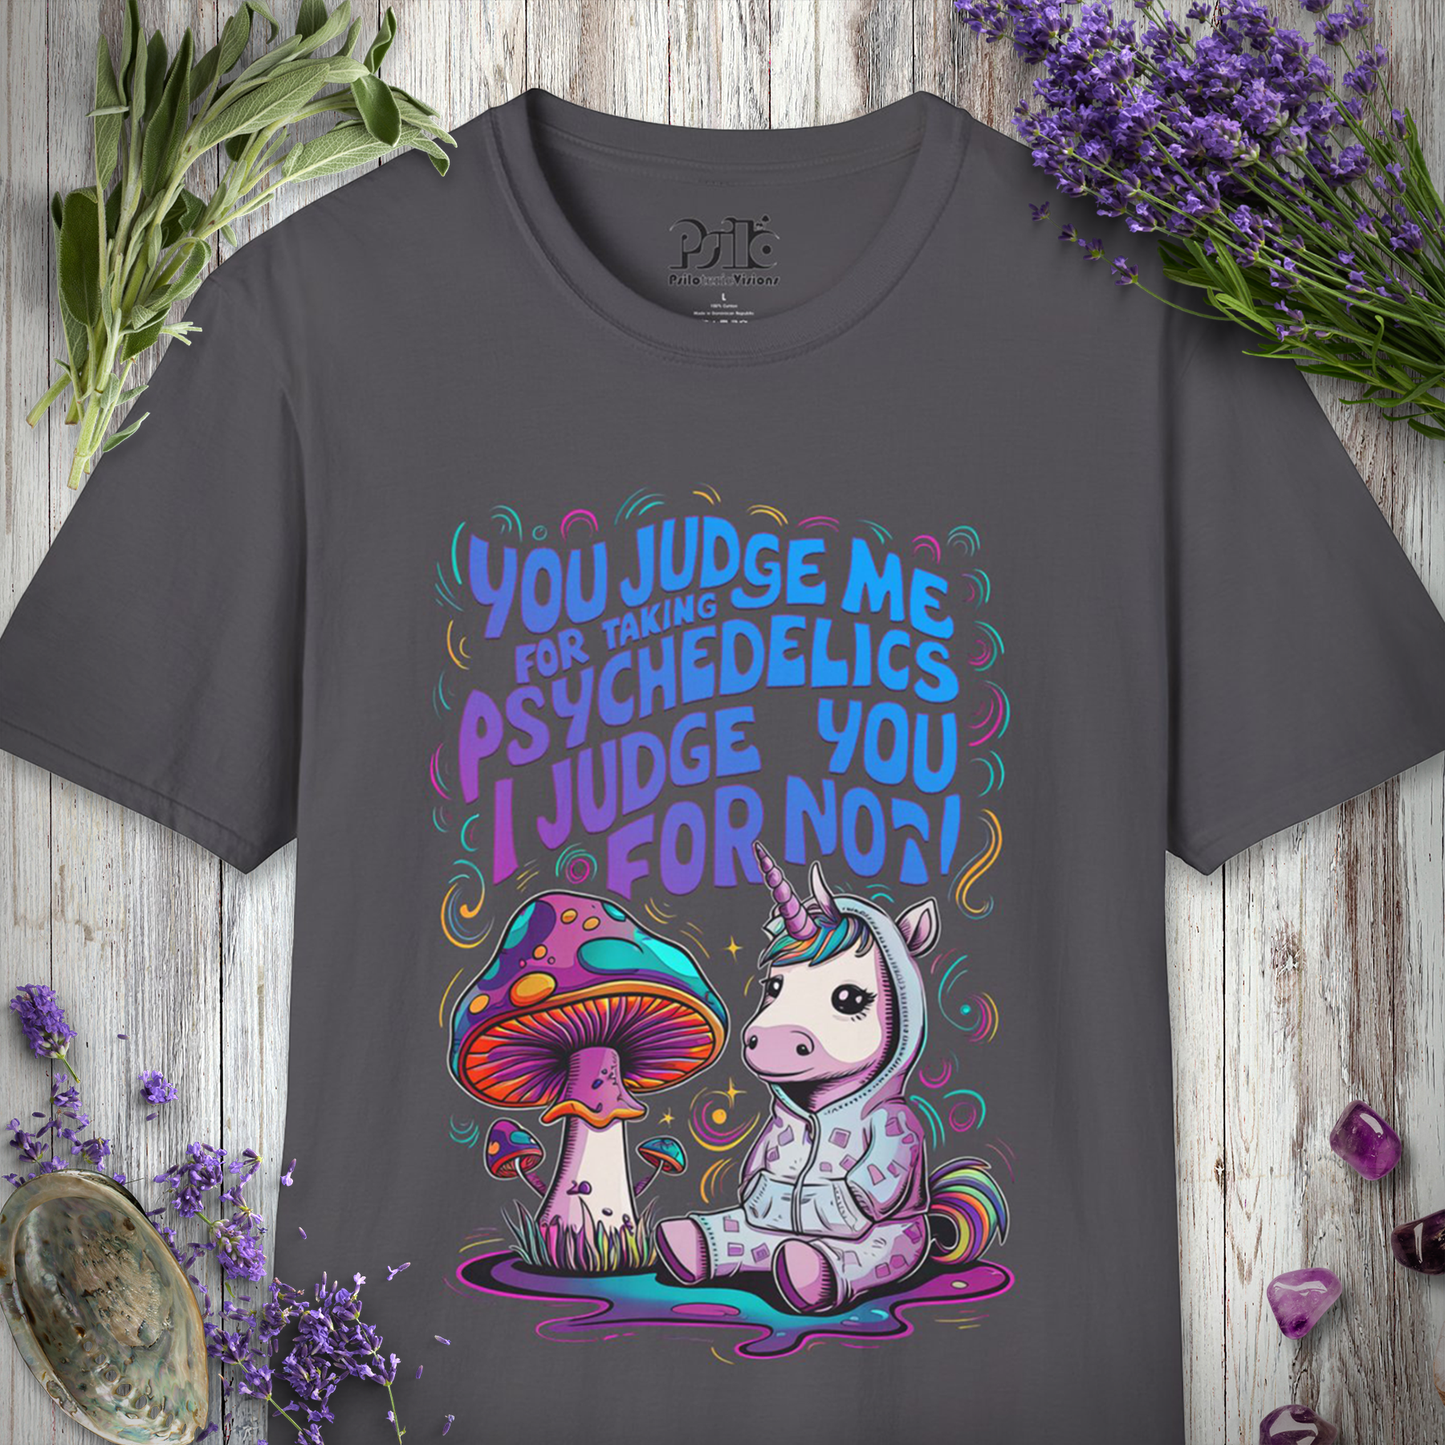 "You Judge Me For Taking Psychedelics, I Judge You For Not" Unisex SOFTSTYLE T-SHIRT